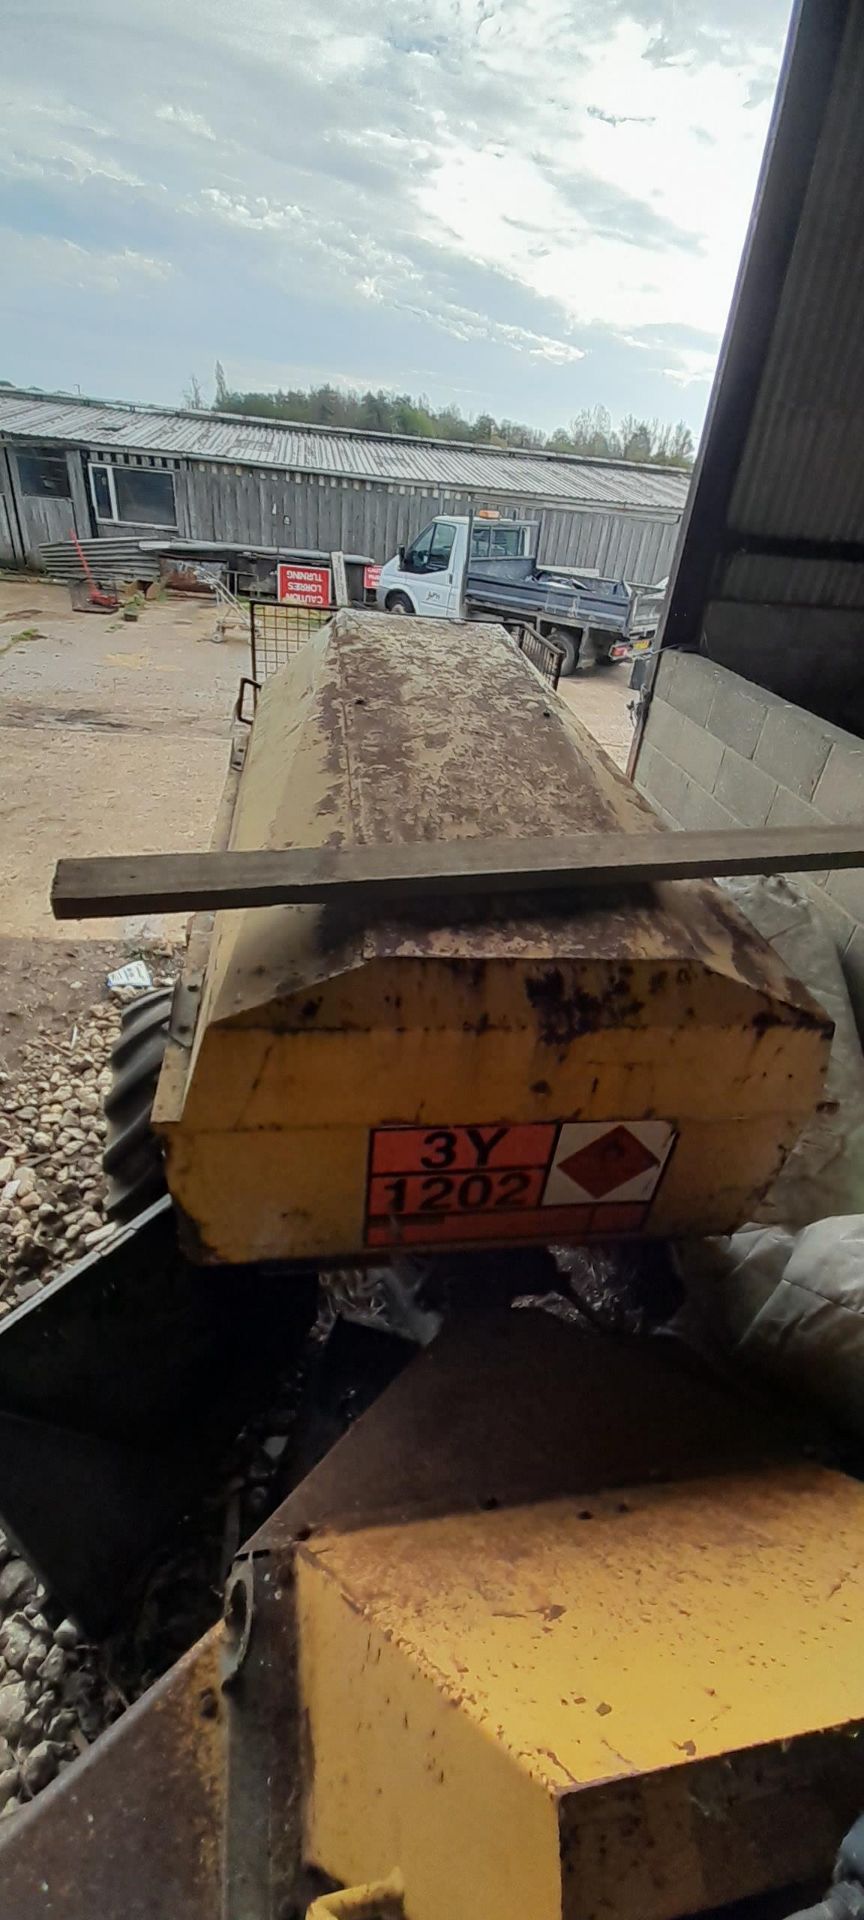 Newson 6 Tonne Dumper converted to mobile fuel dowser – Spares or Repair - Image 7 of 7